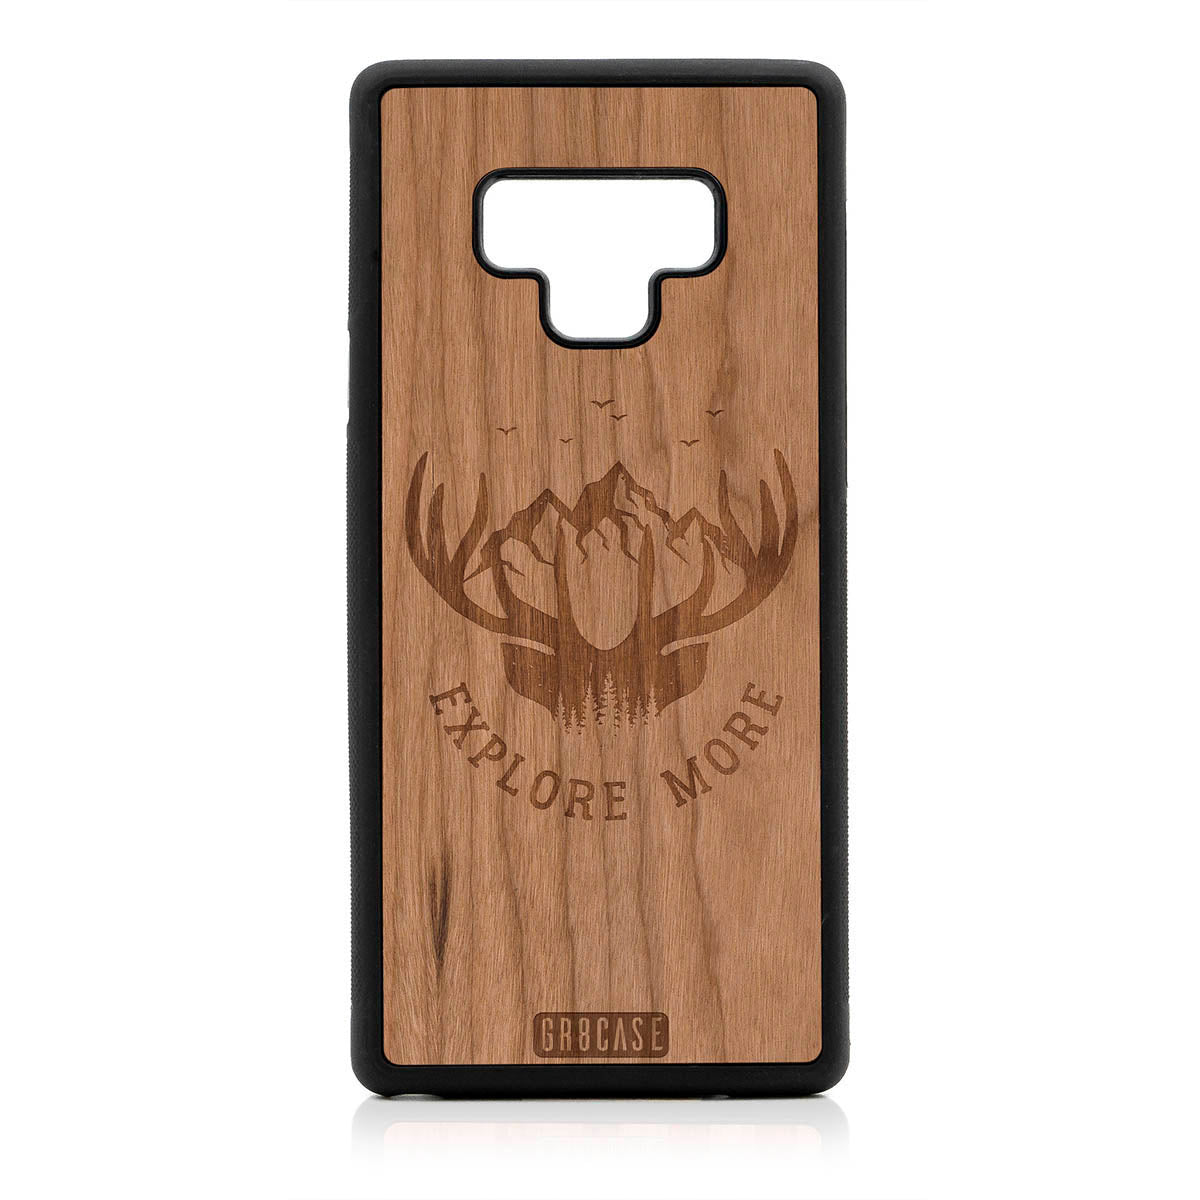 Explore More (Forest, Mountains & Antlers) Design Wood Case For Samsung Galaxy Note 9 by GR8CASE